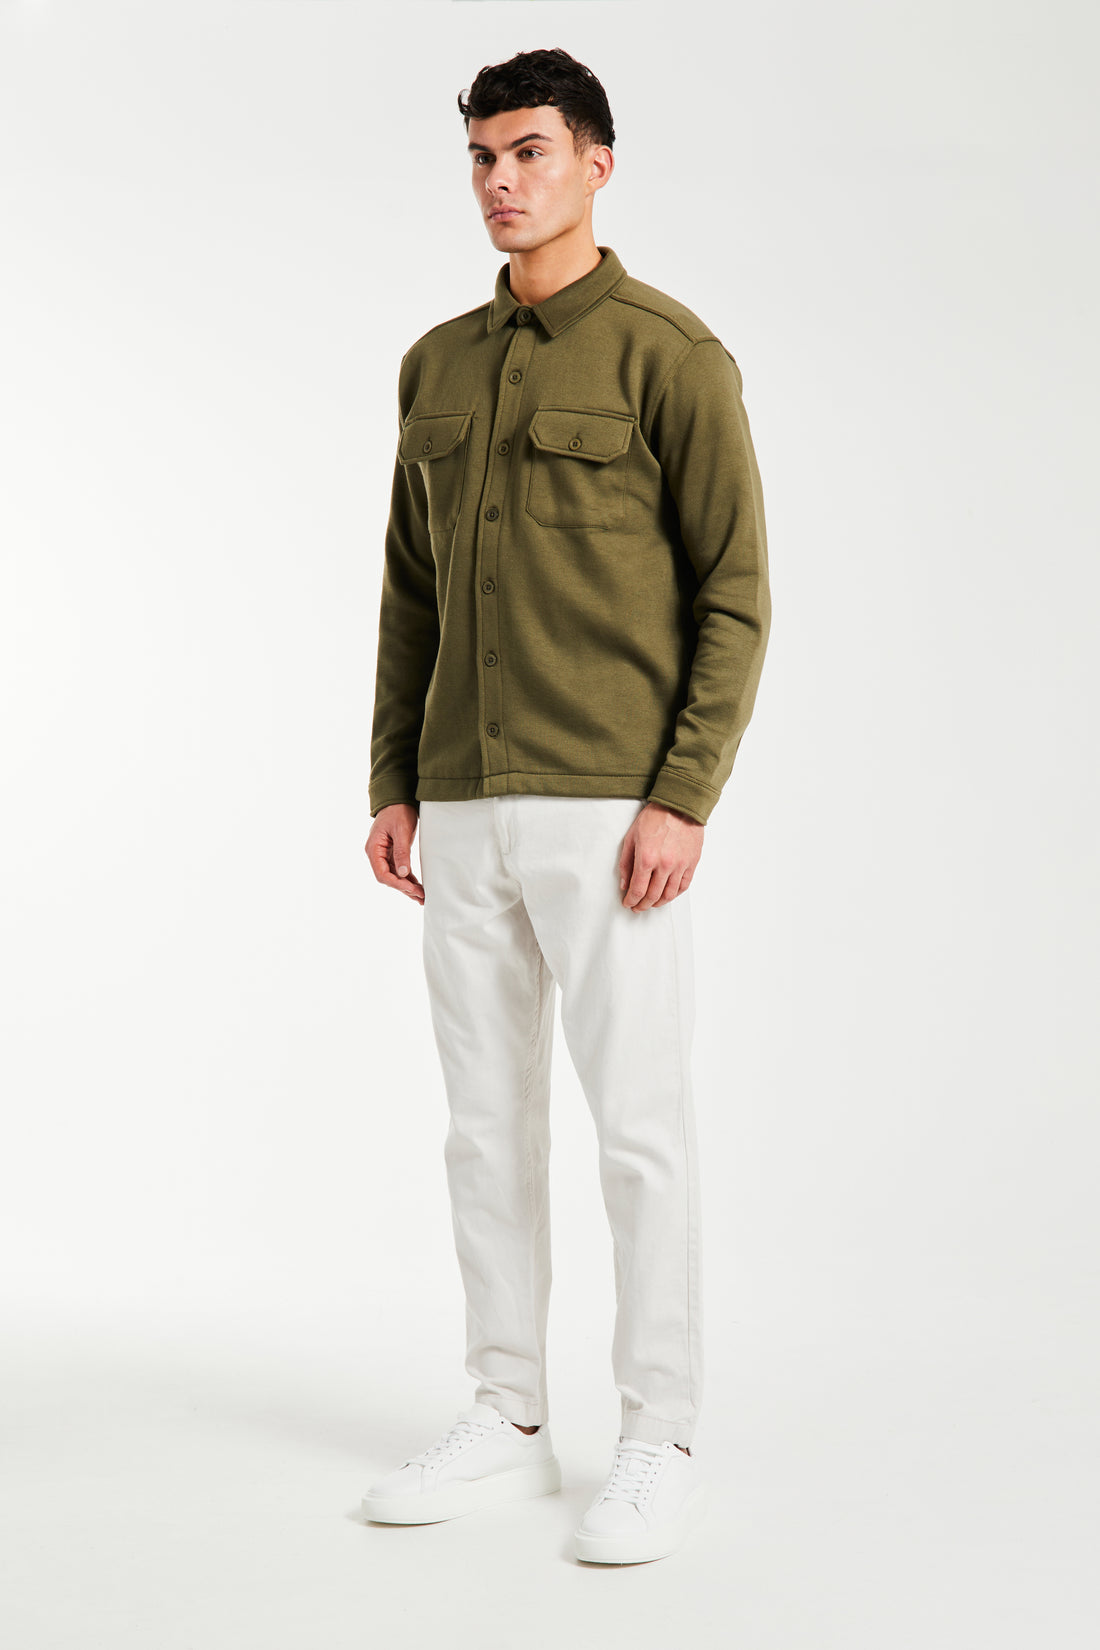 Model wearing outfit with men's chino sale on in white